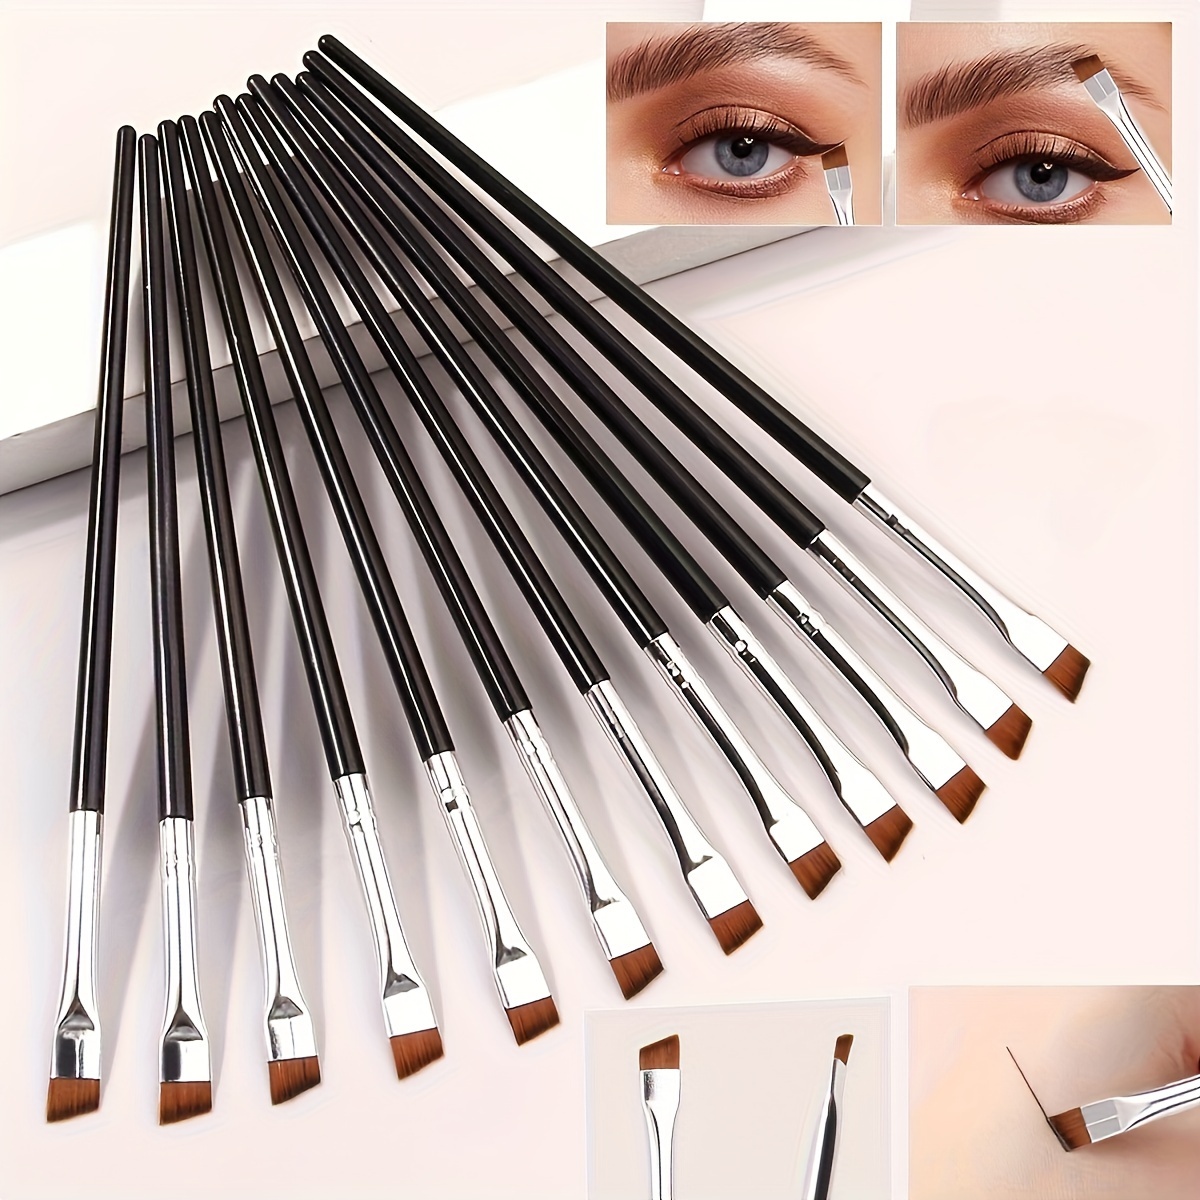 

12-piece Precision Eyeliner Brush Set - Ultra-thin, Angled Tips For Flawless Application - Nylon Bristles, Abs Handle - Fragrance-free, Ideal For All Skin Types